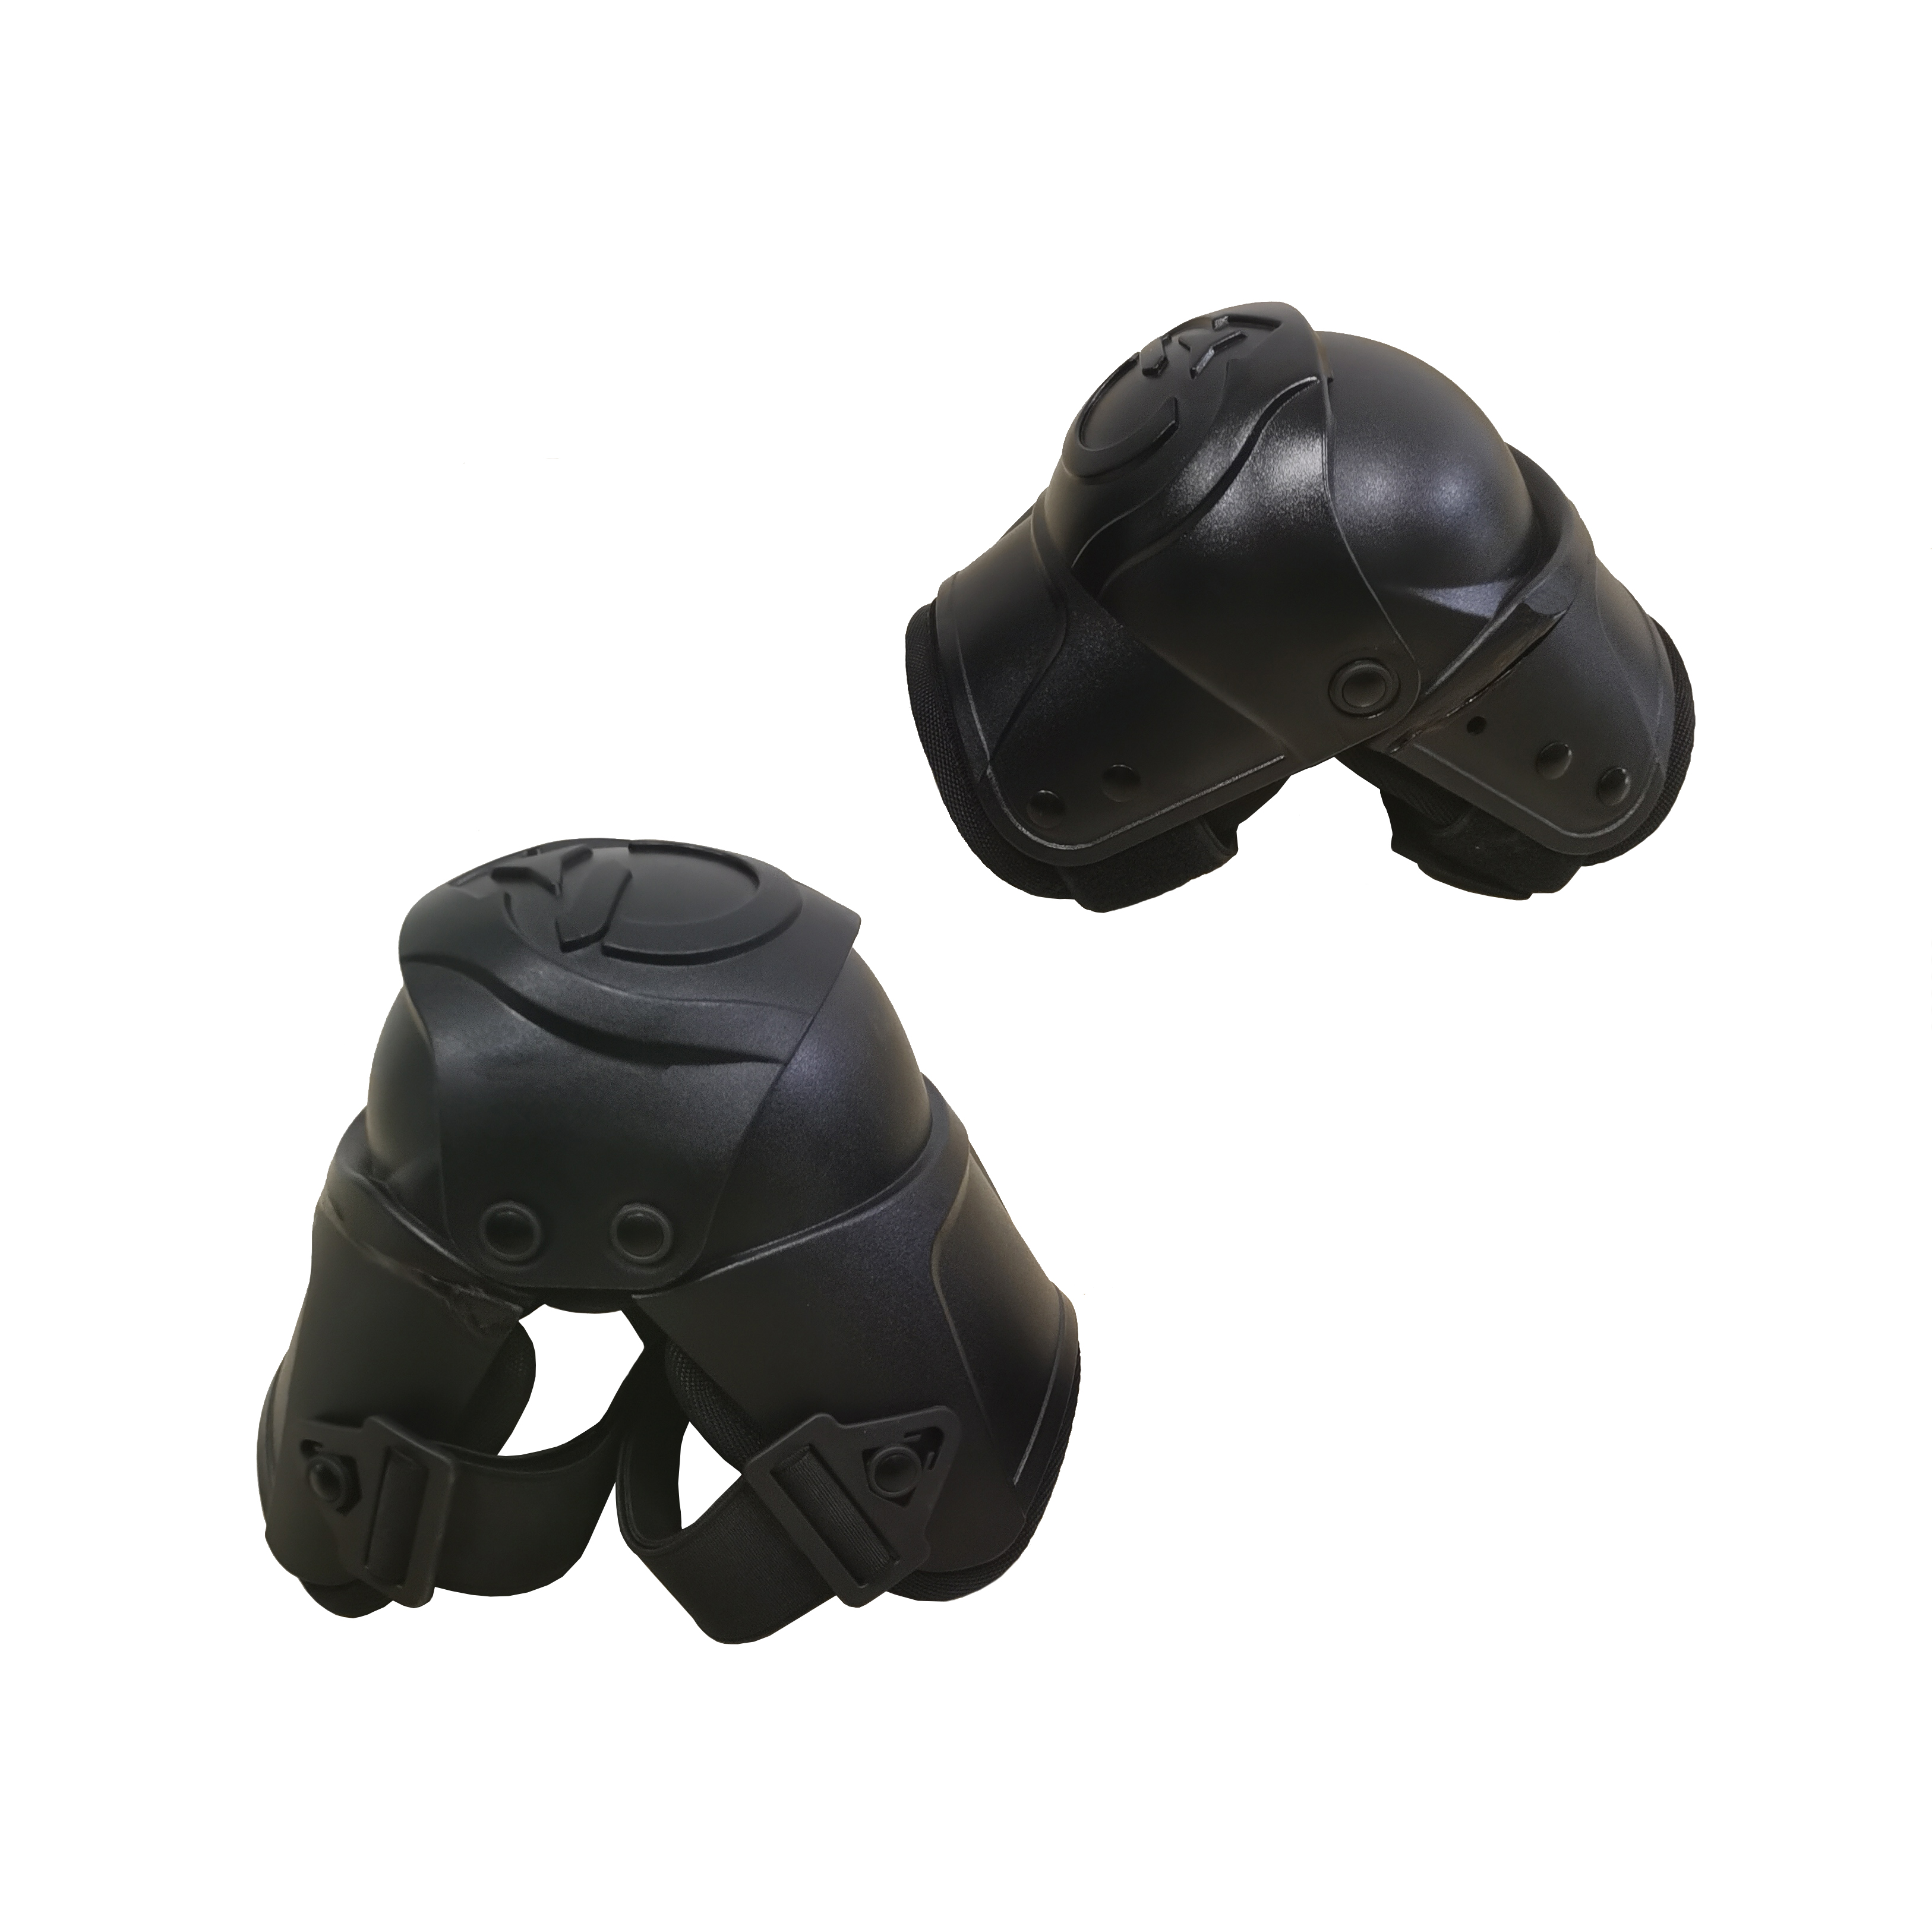 Introducing knee and elbow pads